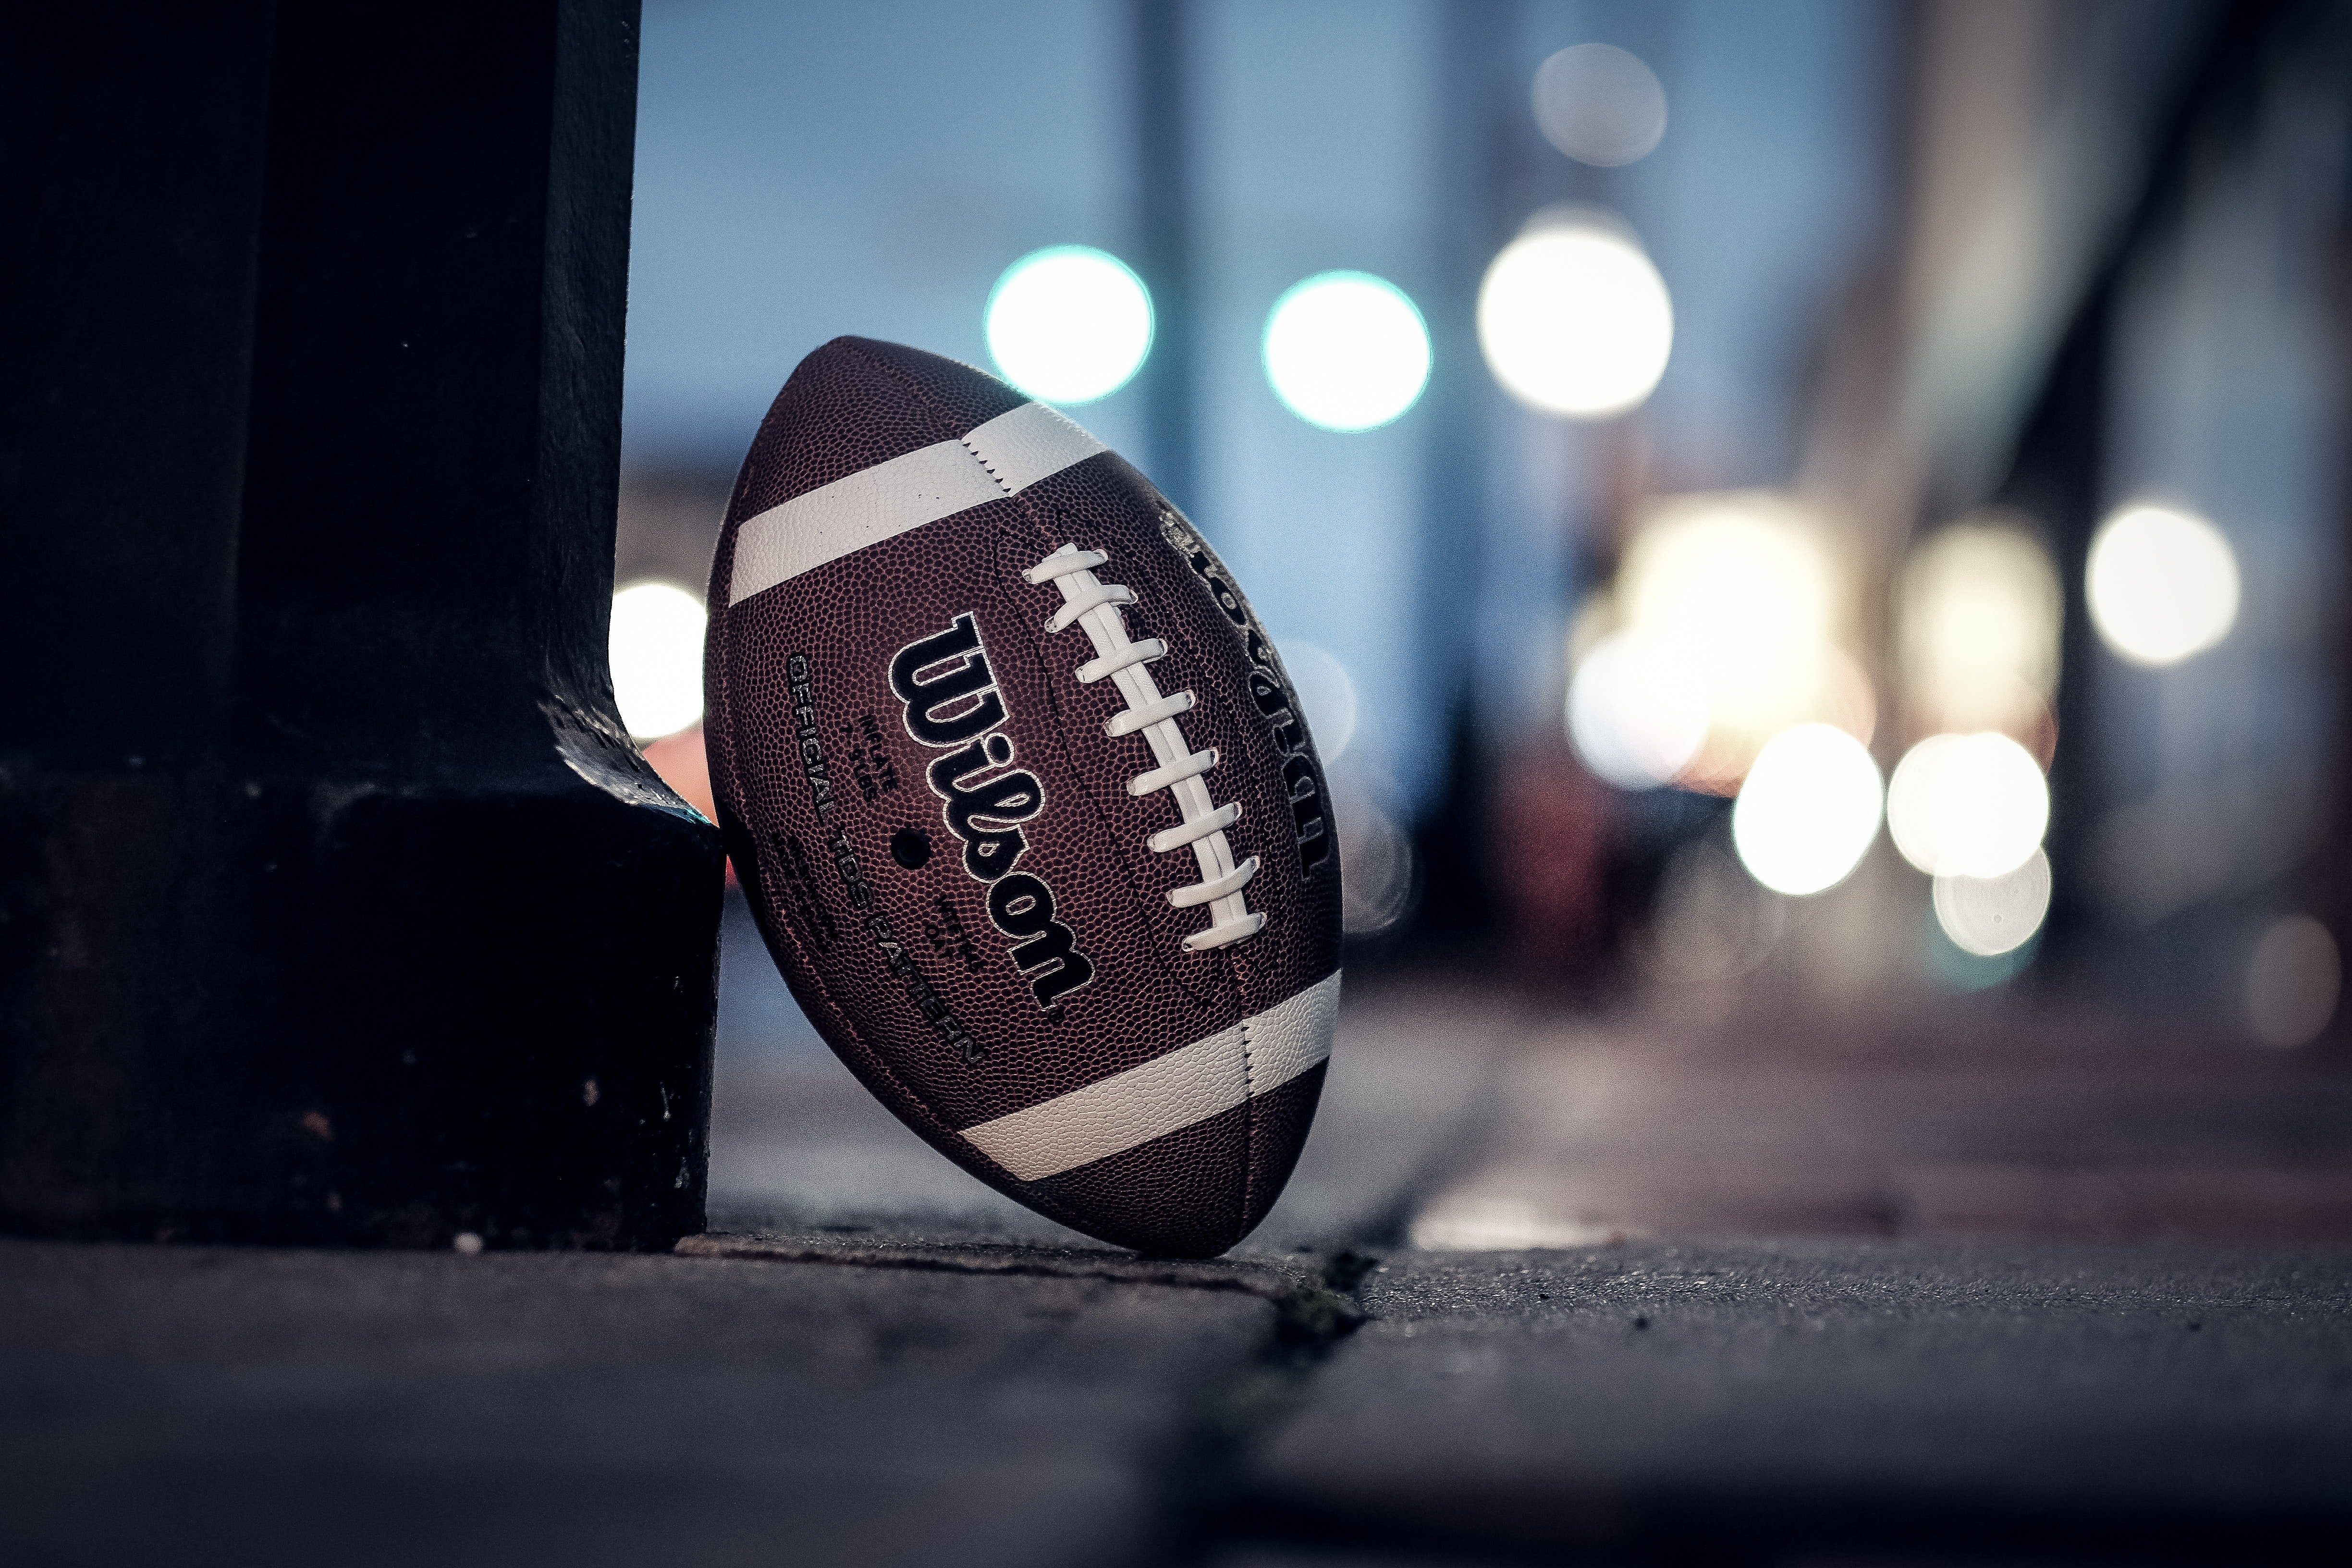 Coult ended up being a successful football player. | Source: Pexels